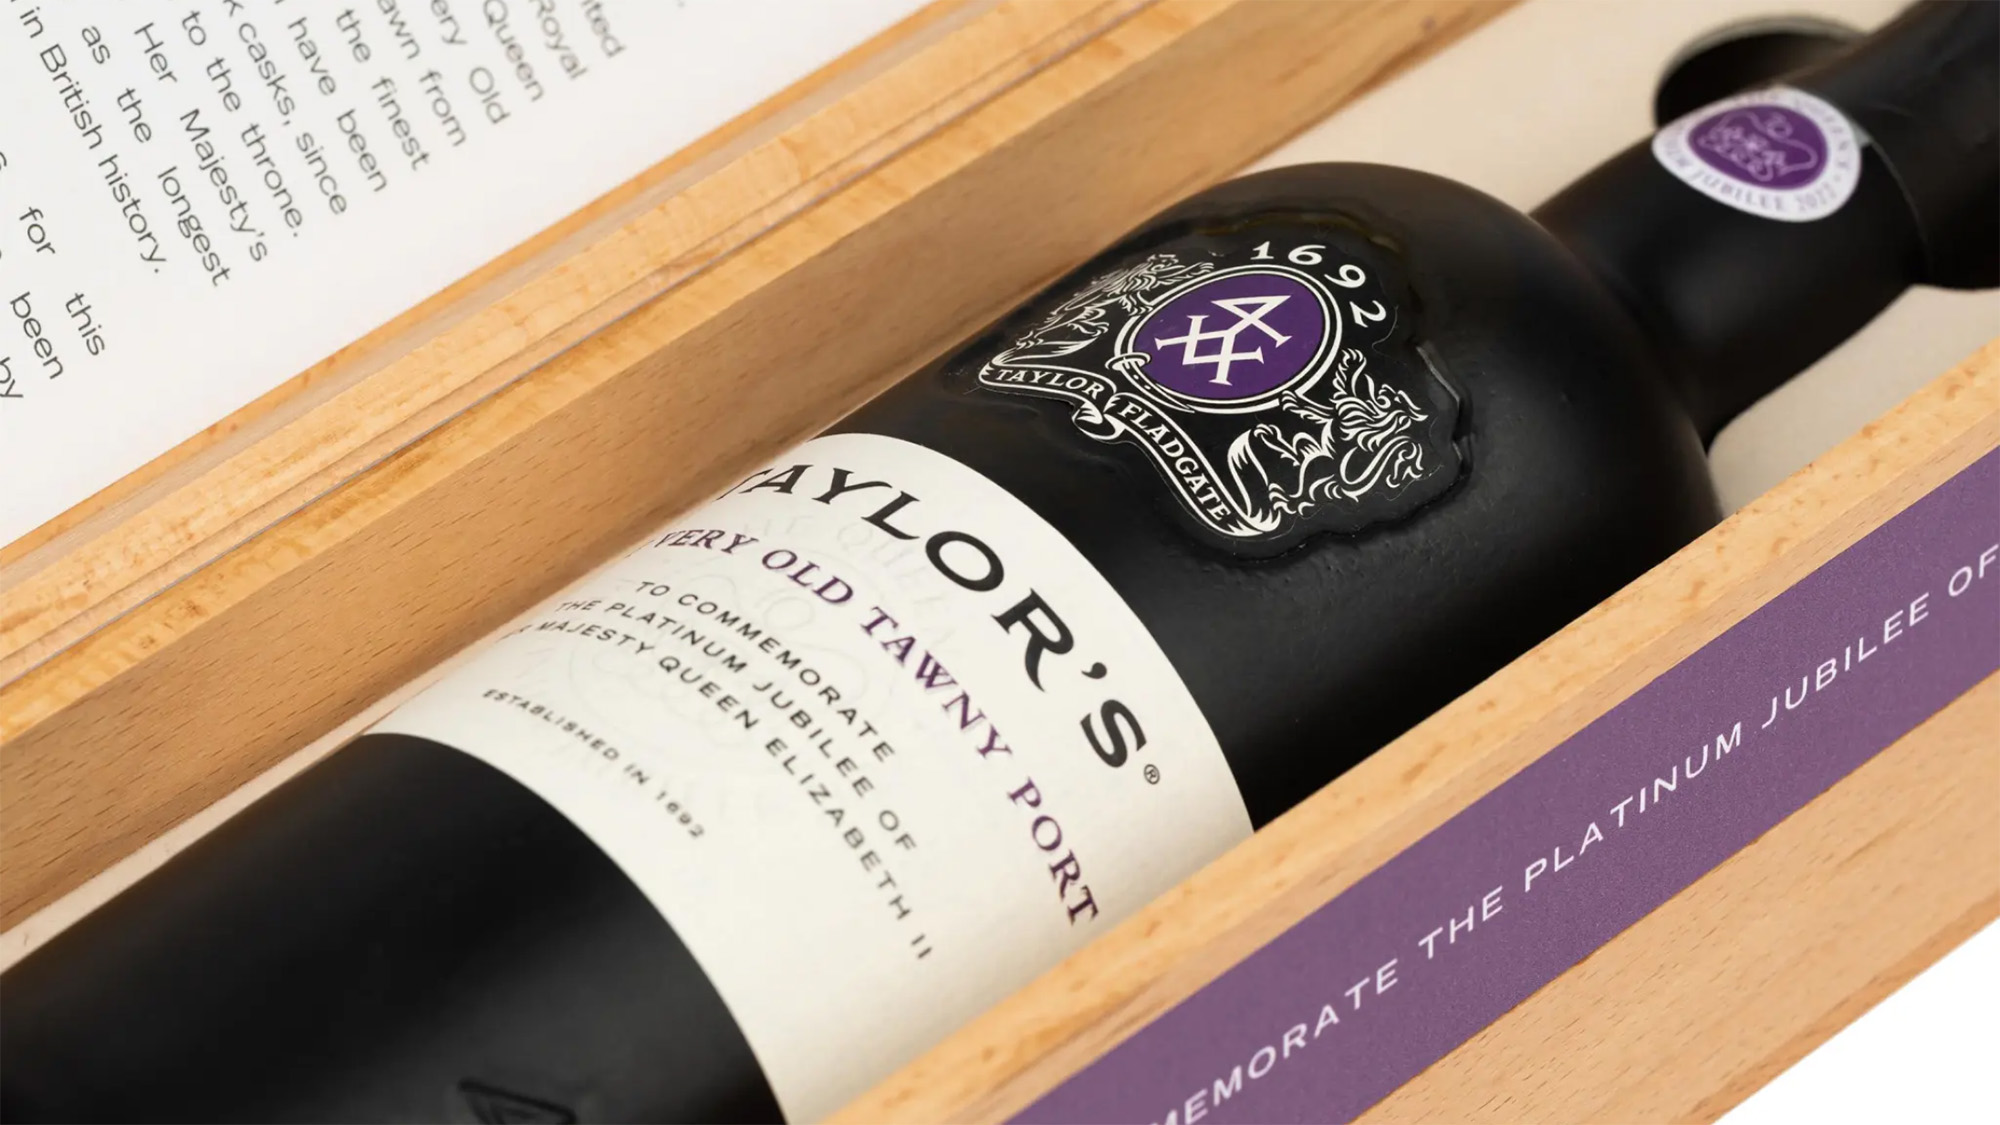 Taylor’s Celebrates Platinum Jubilee With Very Very Old Tawny Port box